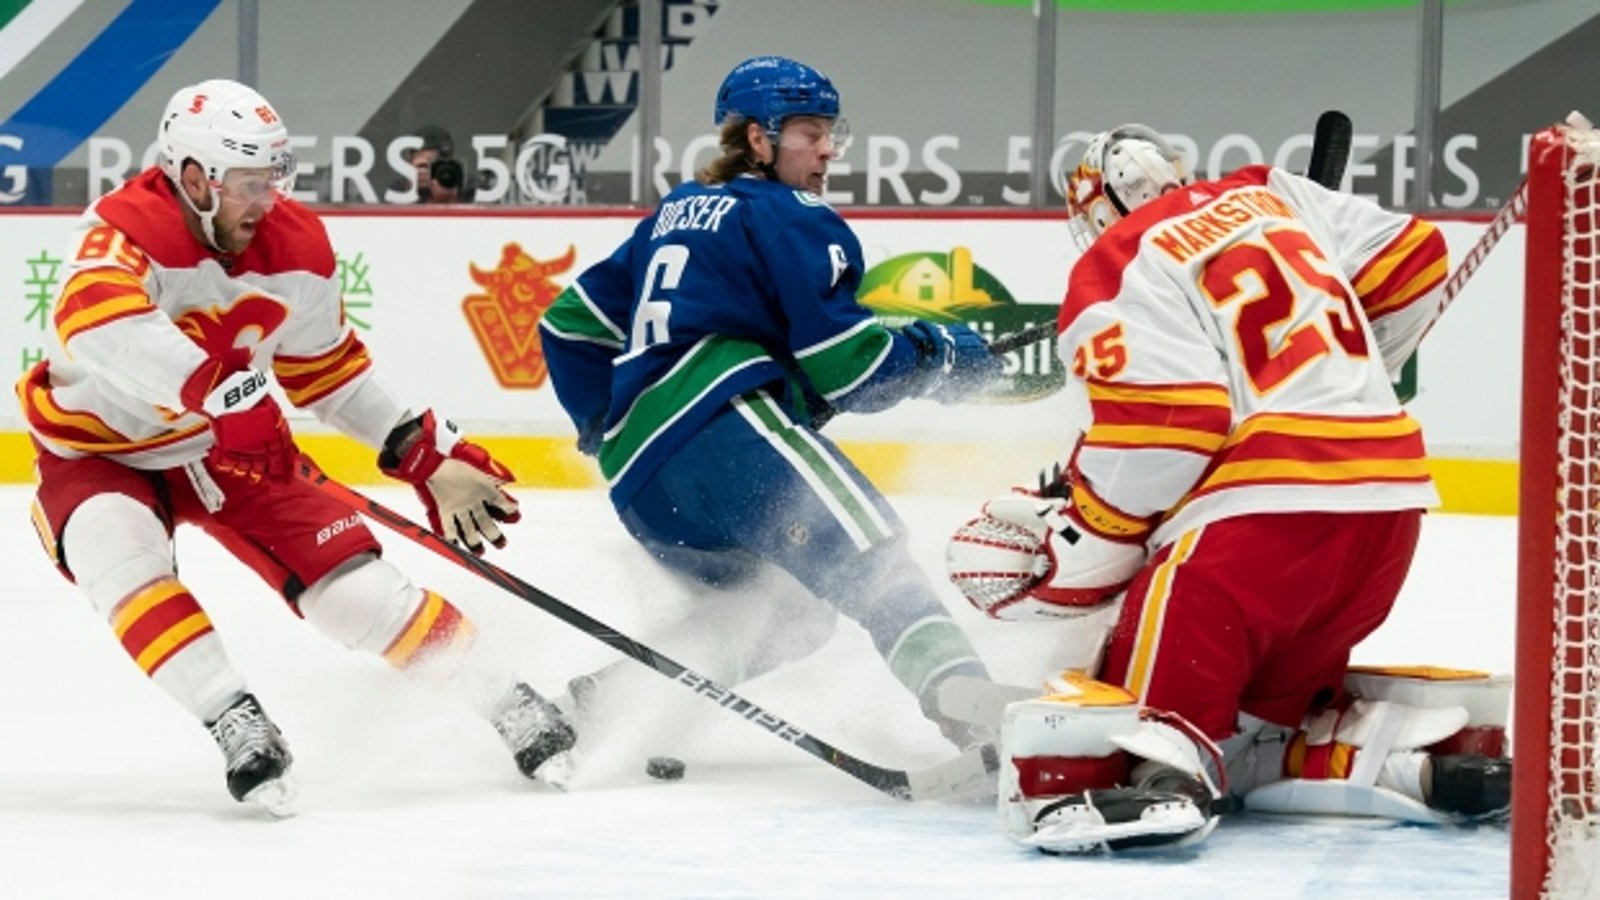 Trade brewing between rivals Flames and Canucks?!